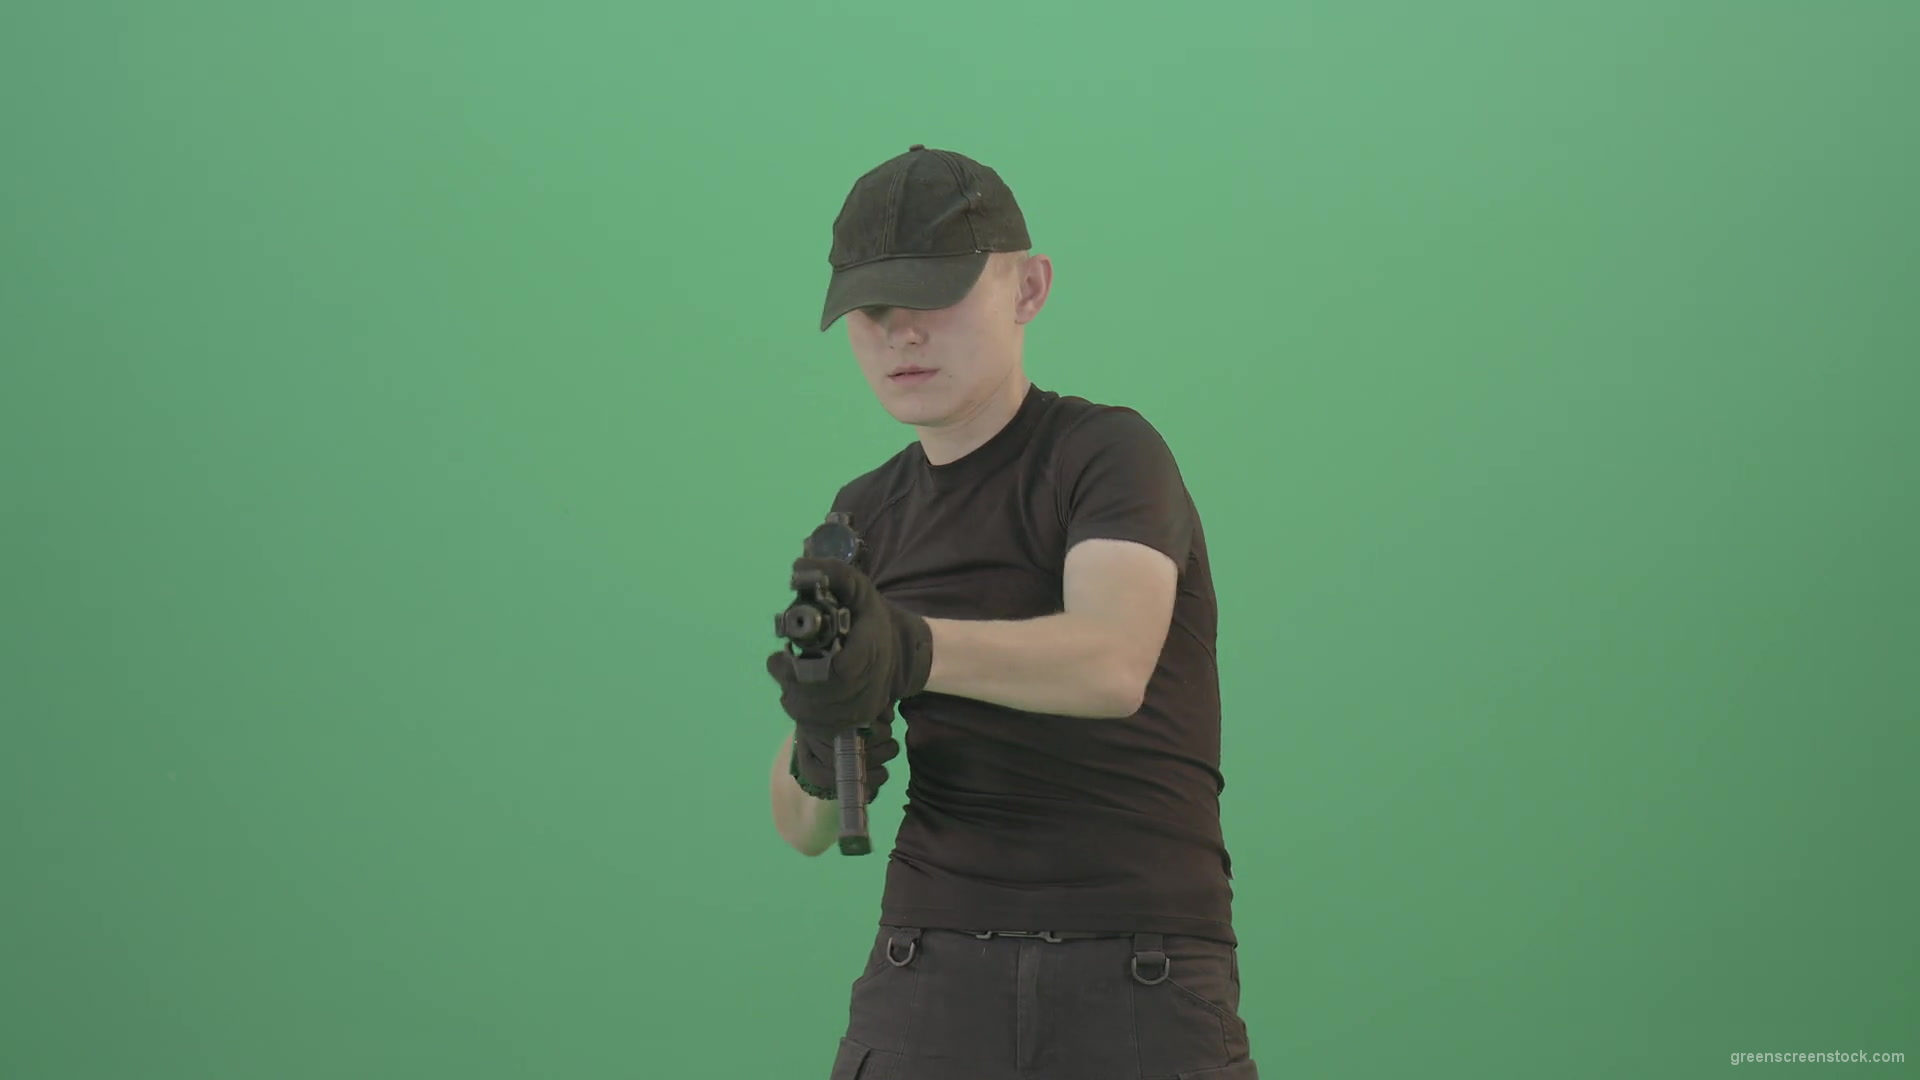 Funny-Small-boy-terrorist-shooting-enemies-from-machine-gun-isolated-on-green-screen-4K-Video-Footage-1920_002 Green Screen Stock